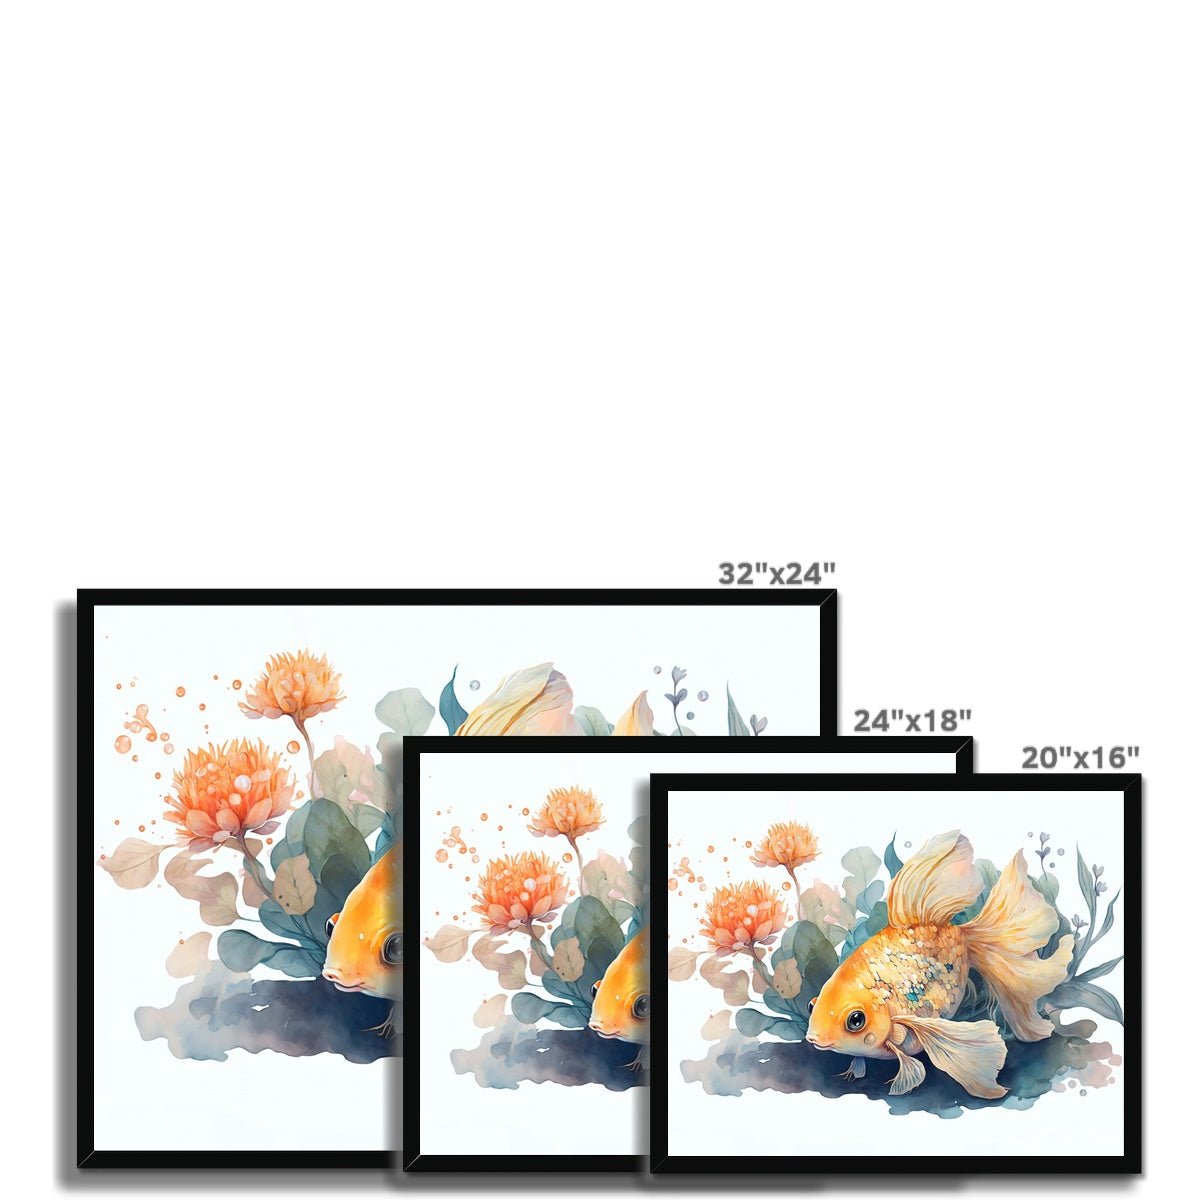 Nature's Serenity - Goldfish Blossoms 1 5 - Animal Poster Print by doingly